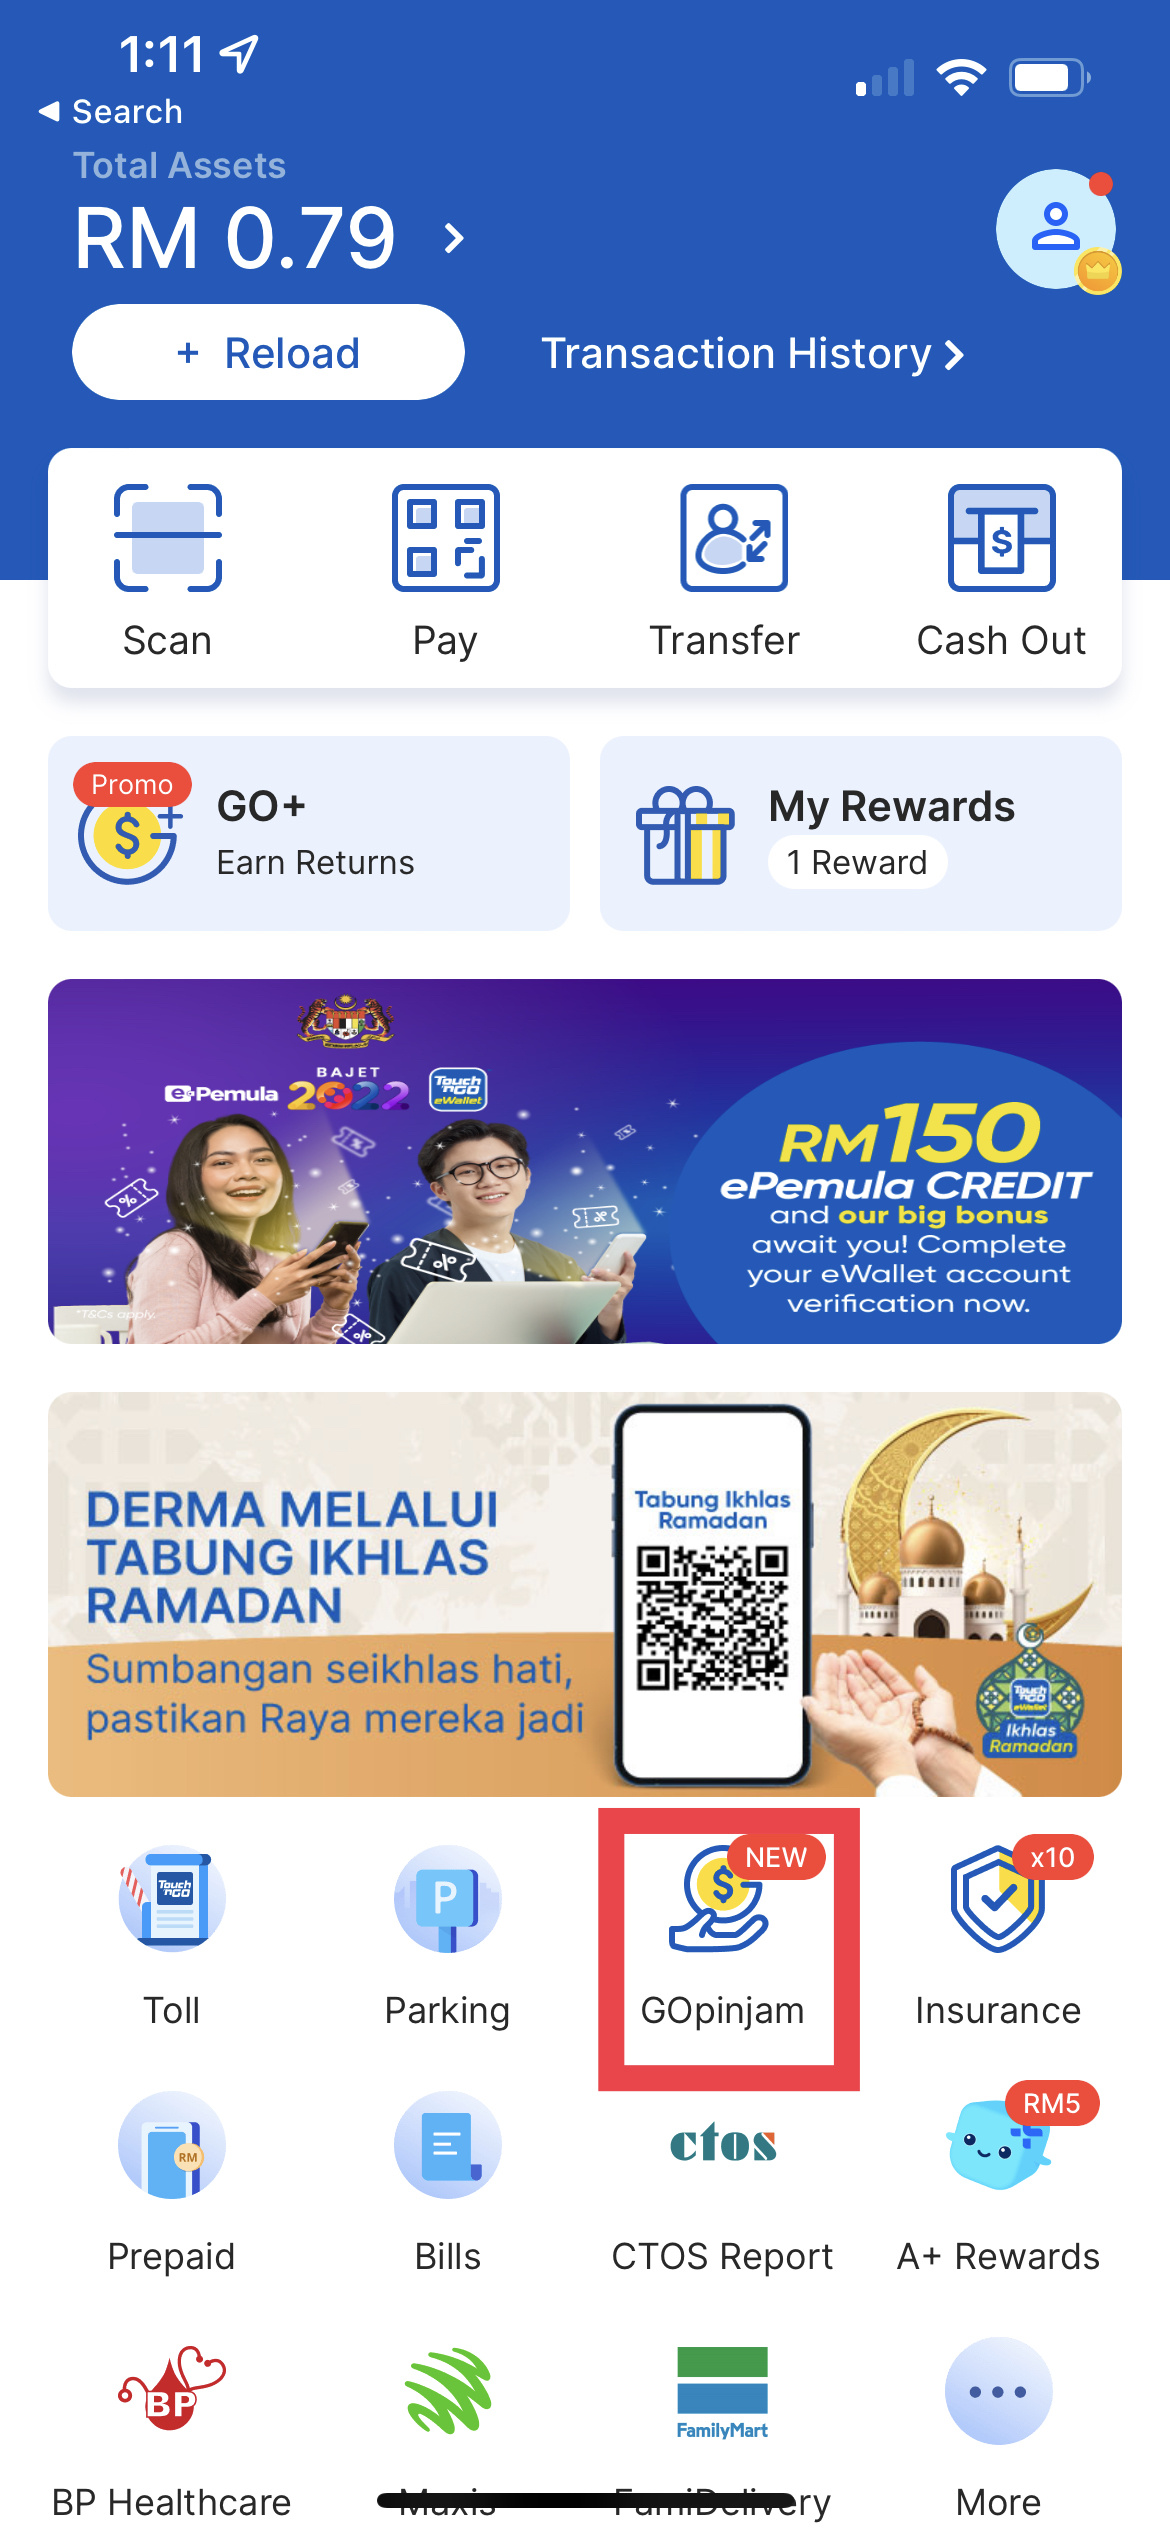 touch-n-go-offers-personal-loans-up-to-rm10000